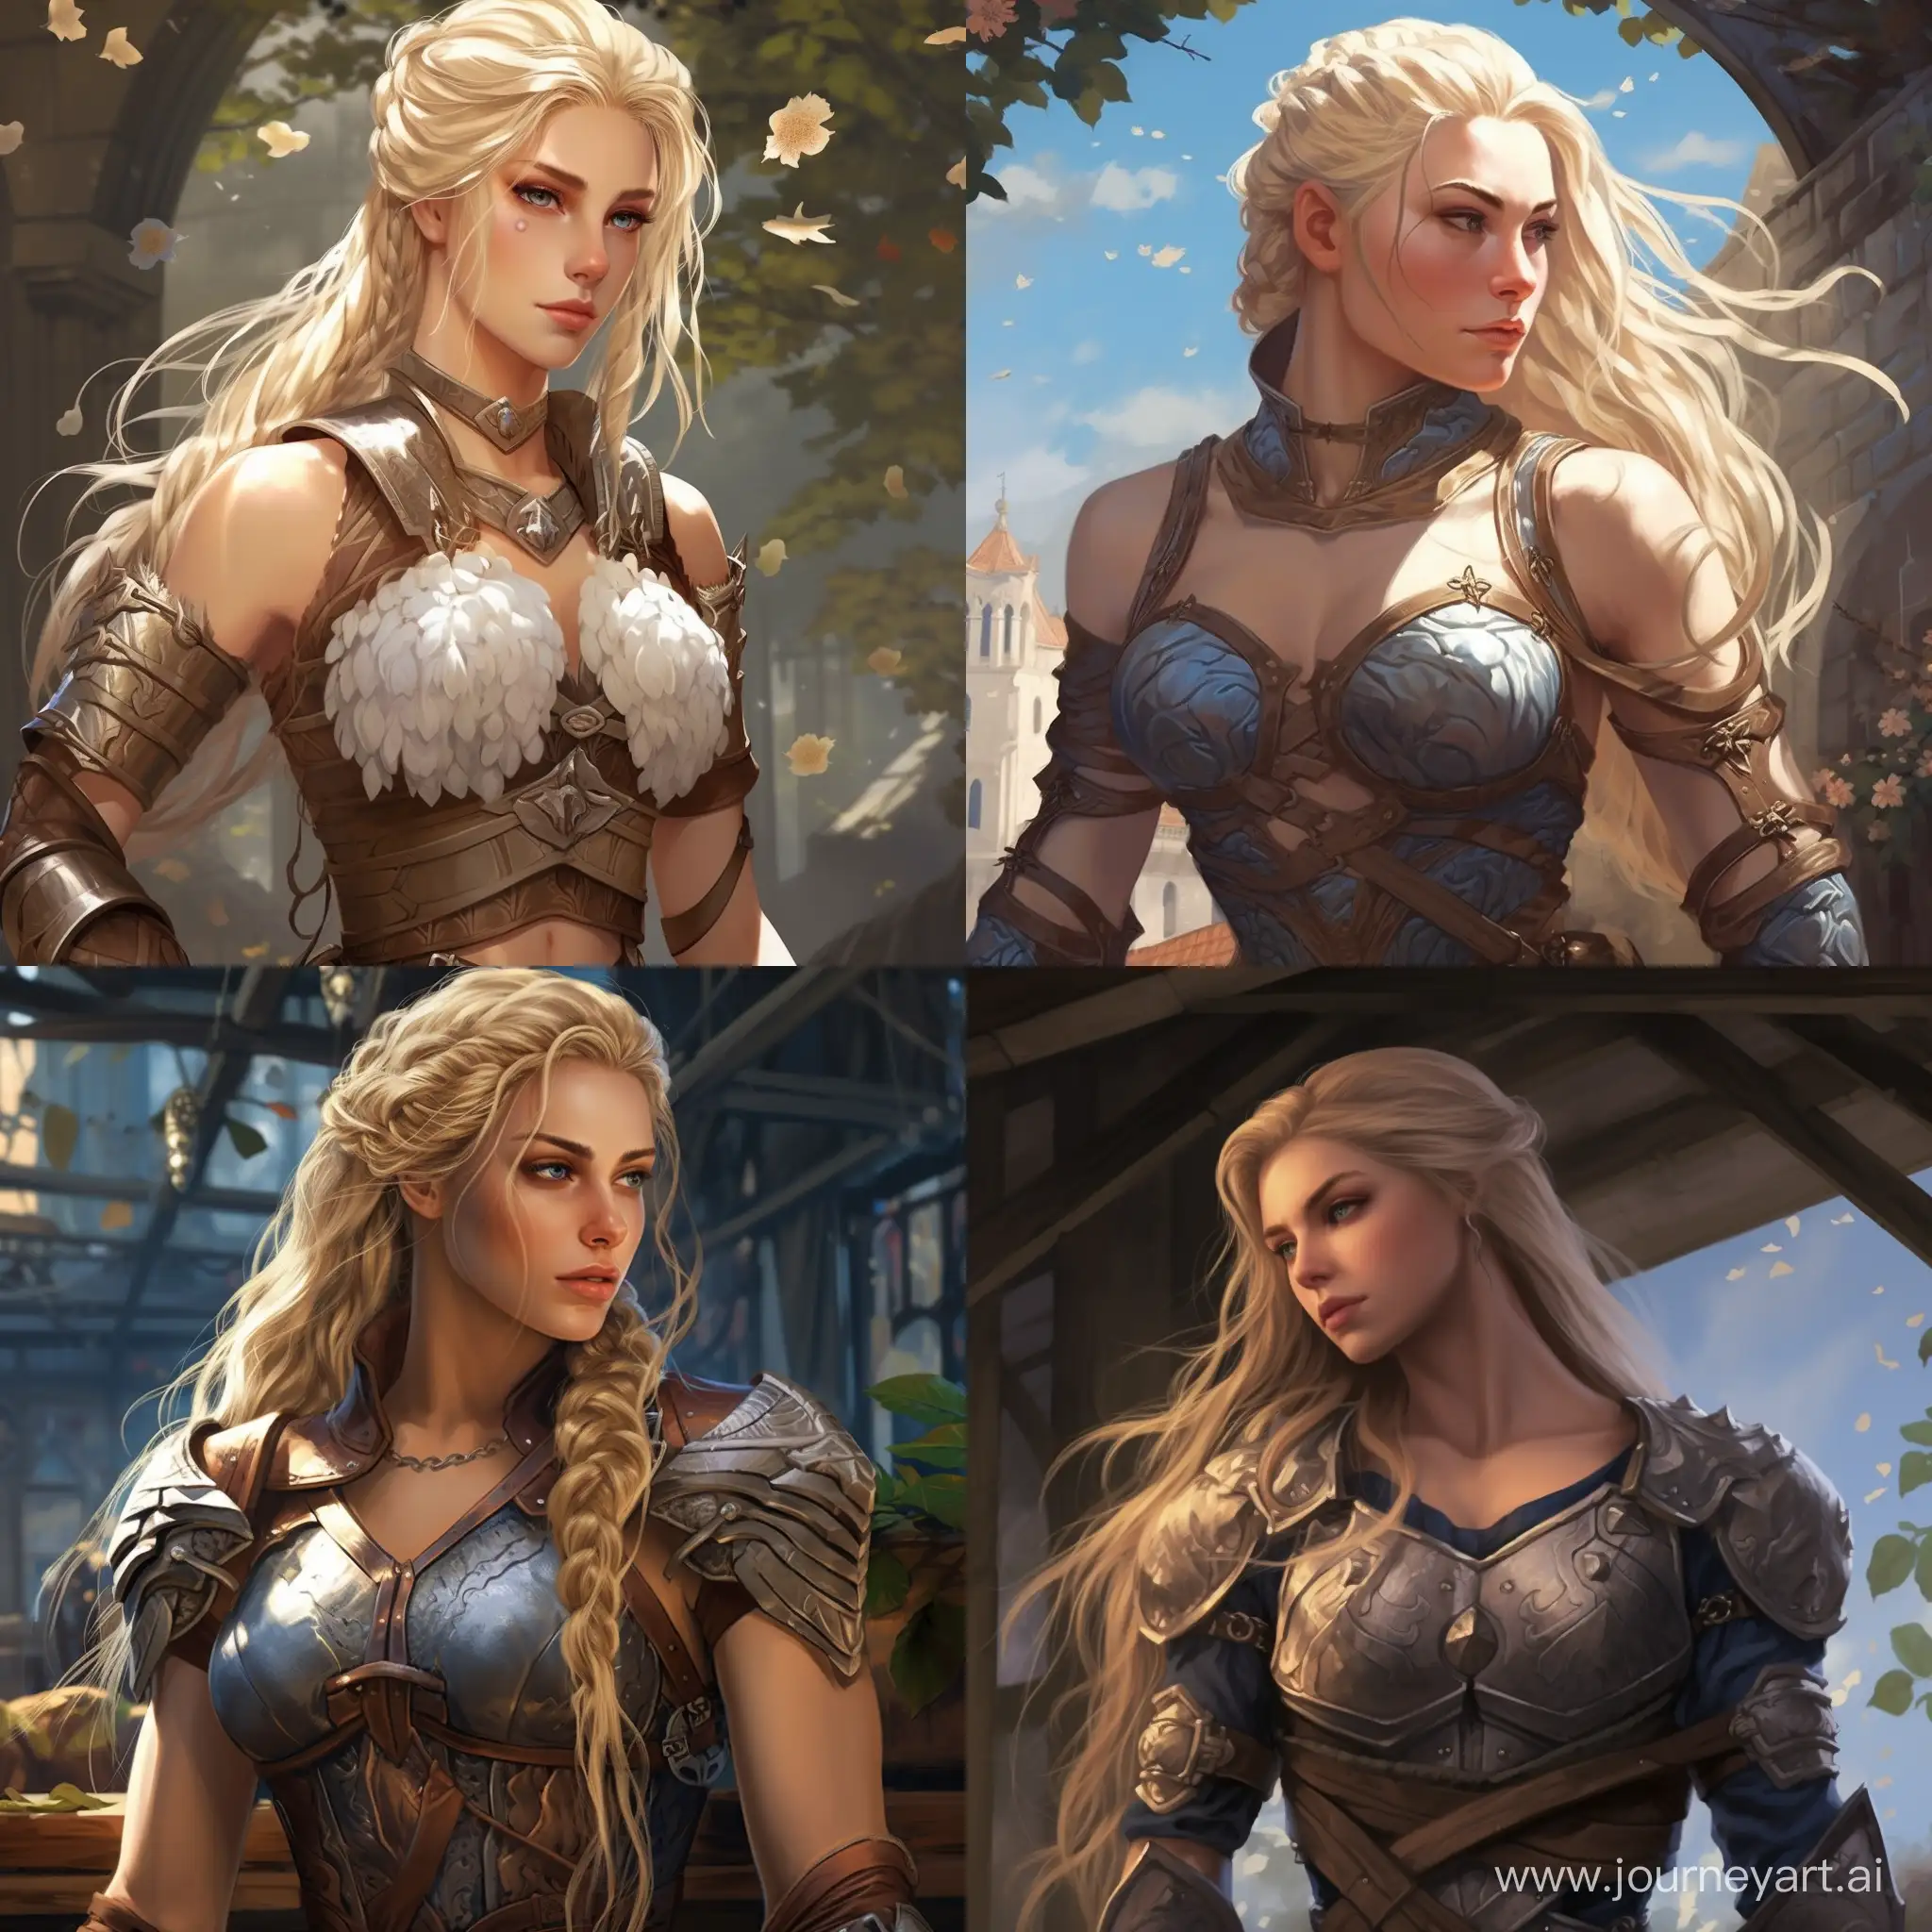 {{{braided ponytail}}},{{thick arms}},muscular female, blonde hair,blue eyes, big breasts, tall female, freckles,hair flower,armor